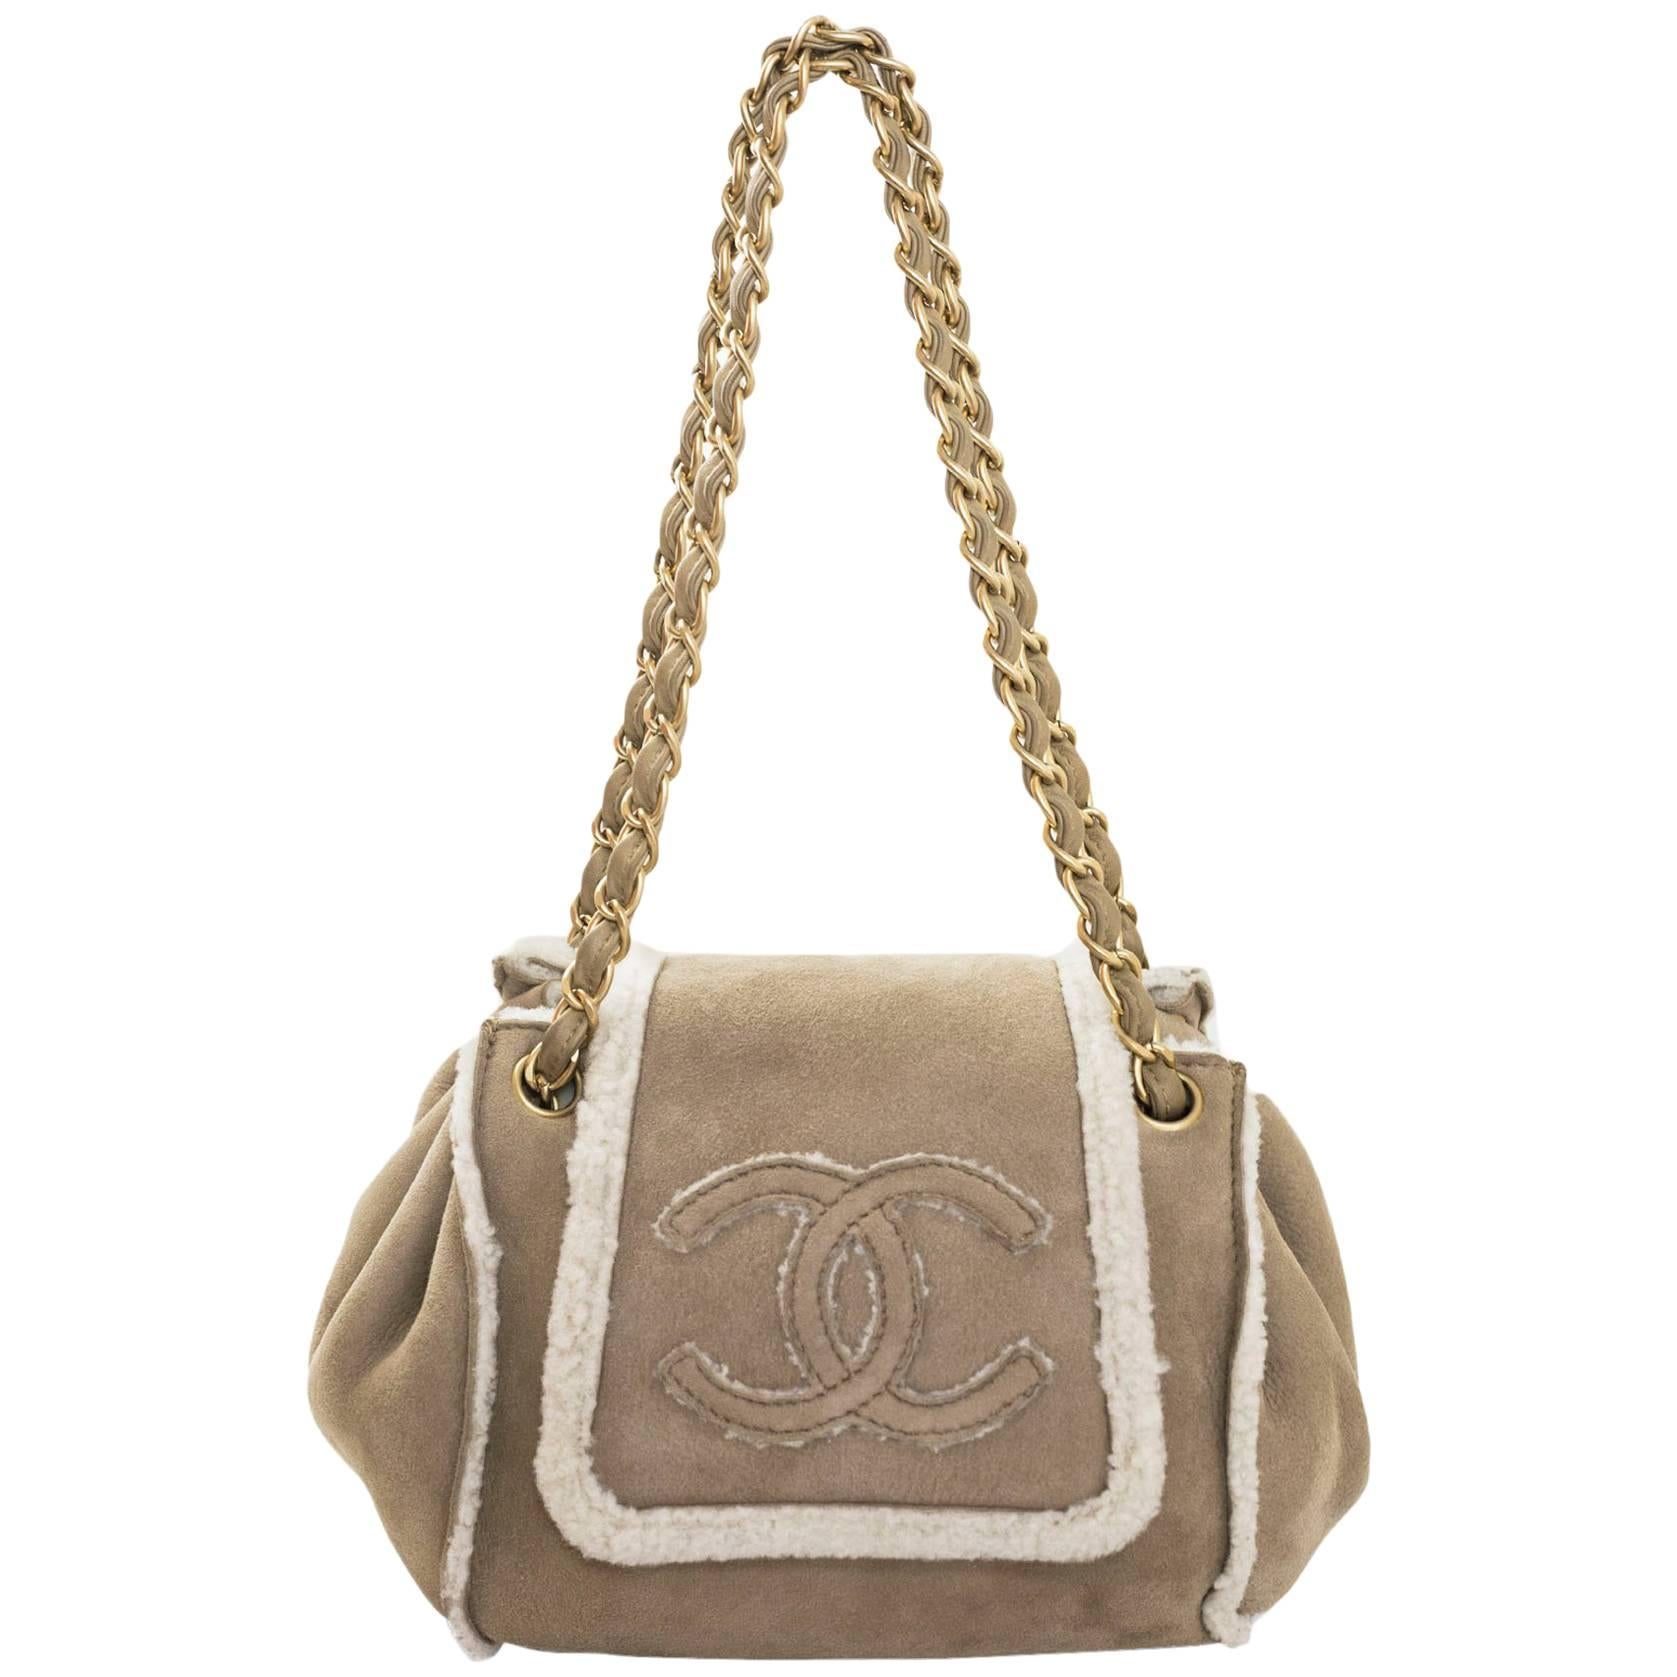 Chanel Beige Shearling Suede CC Small Accordion Bag